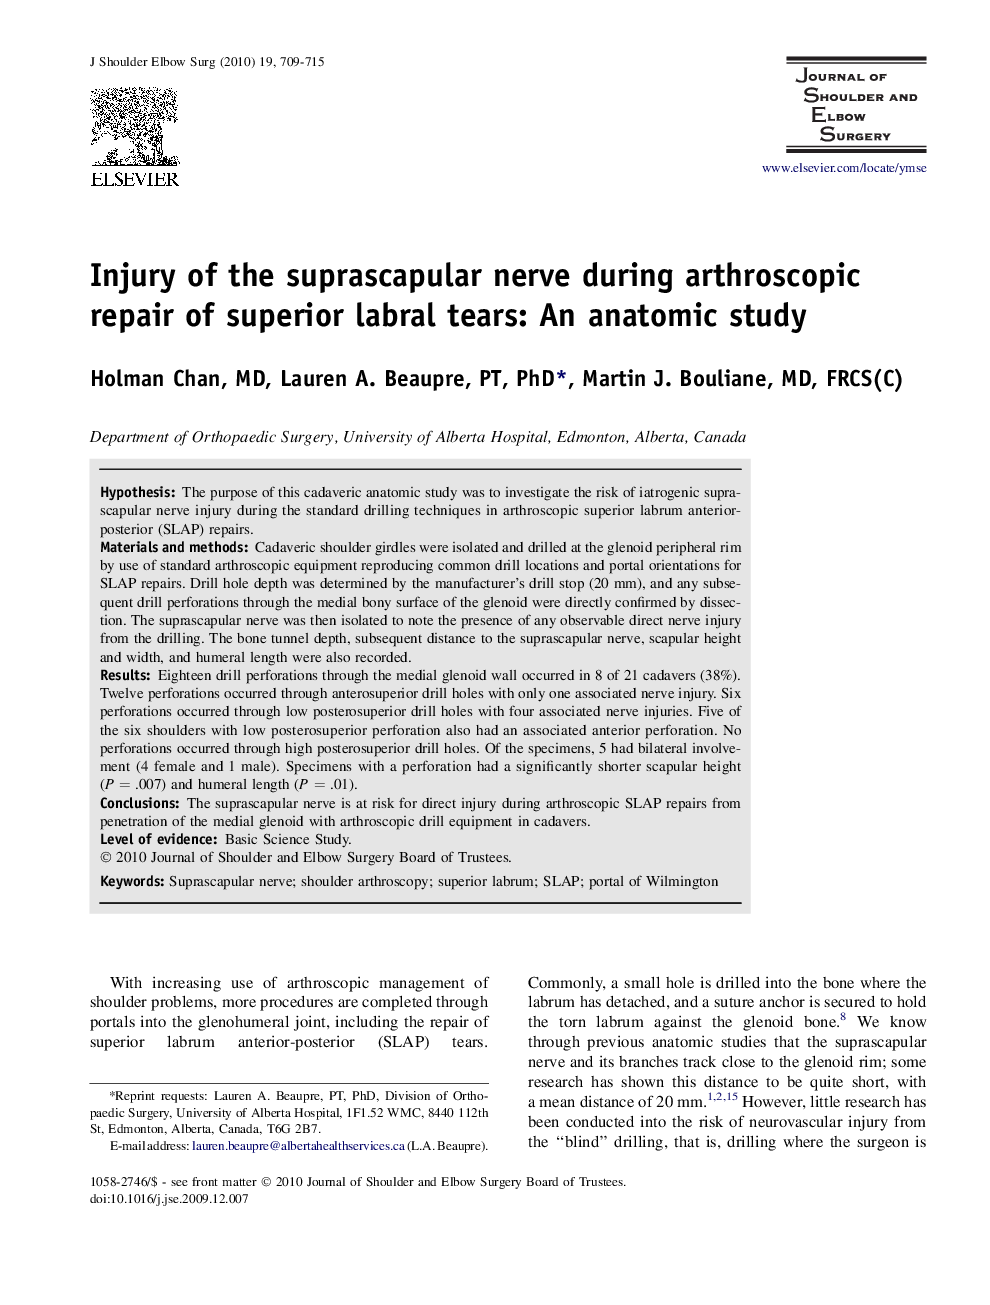 Injury of the suprascapular nerve during arthroscopic repair of superior labral tears: An anatomic study